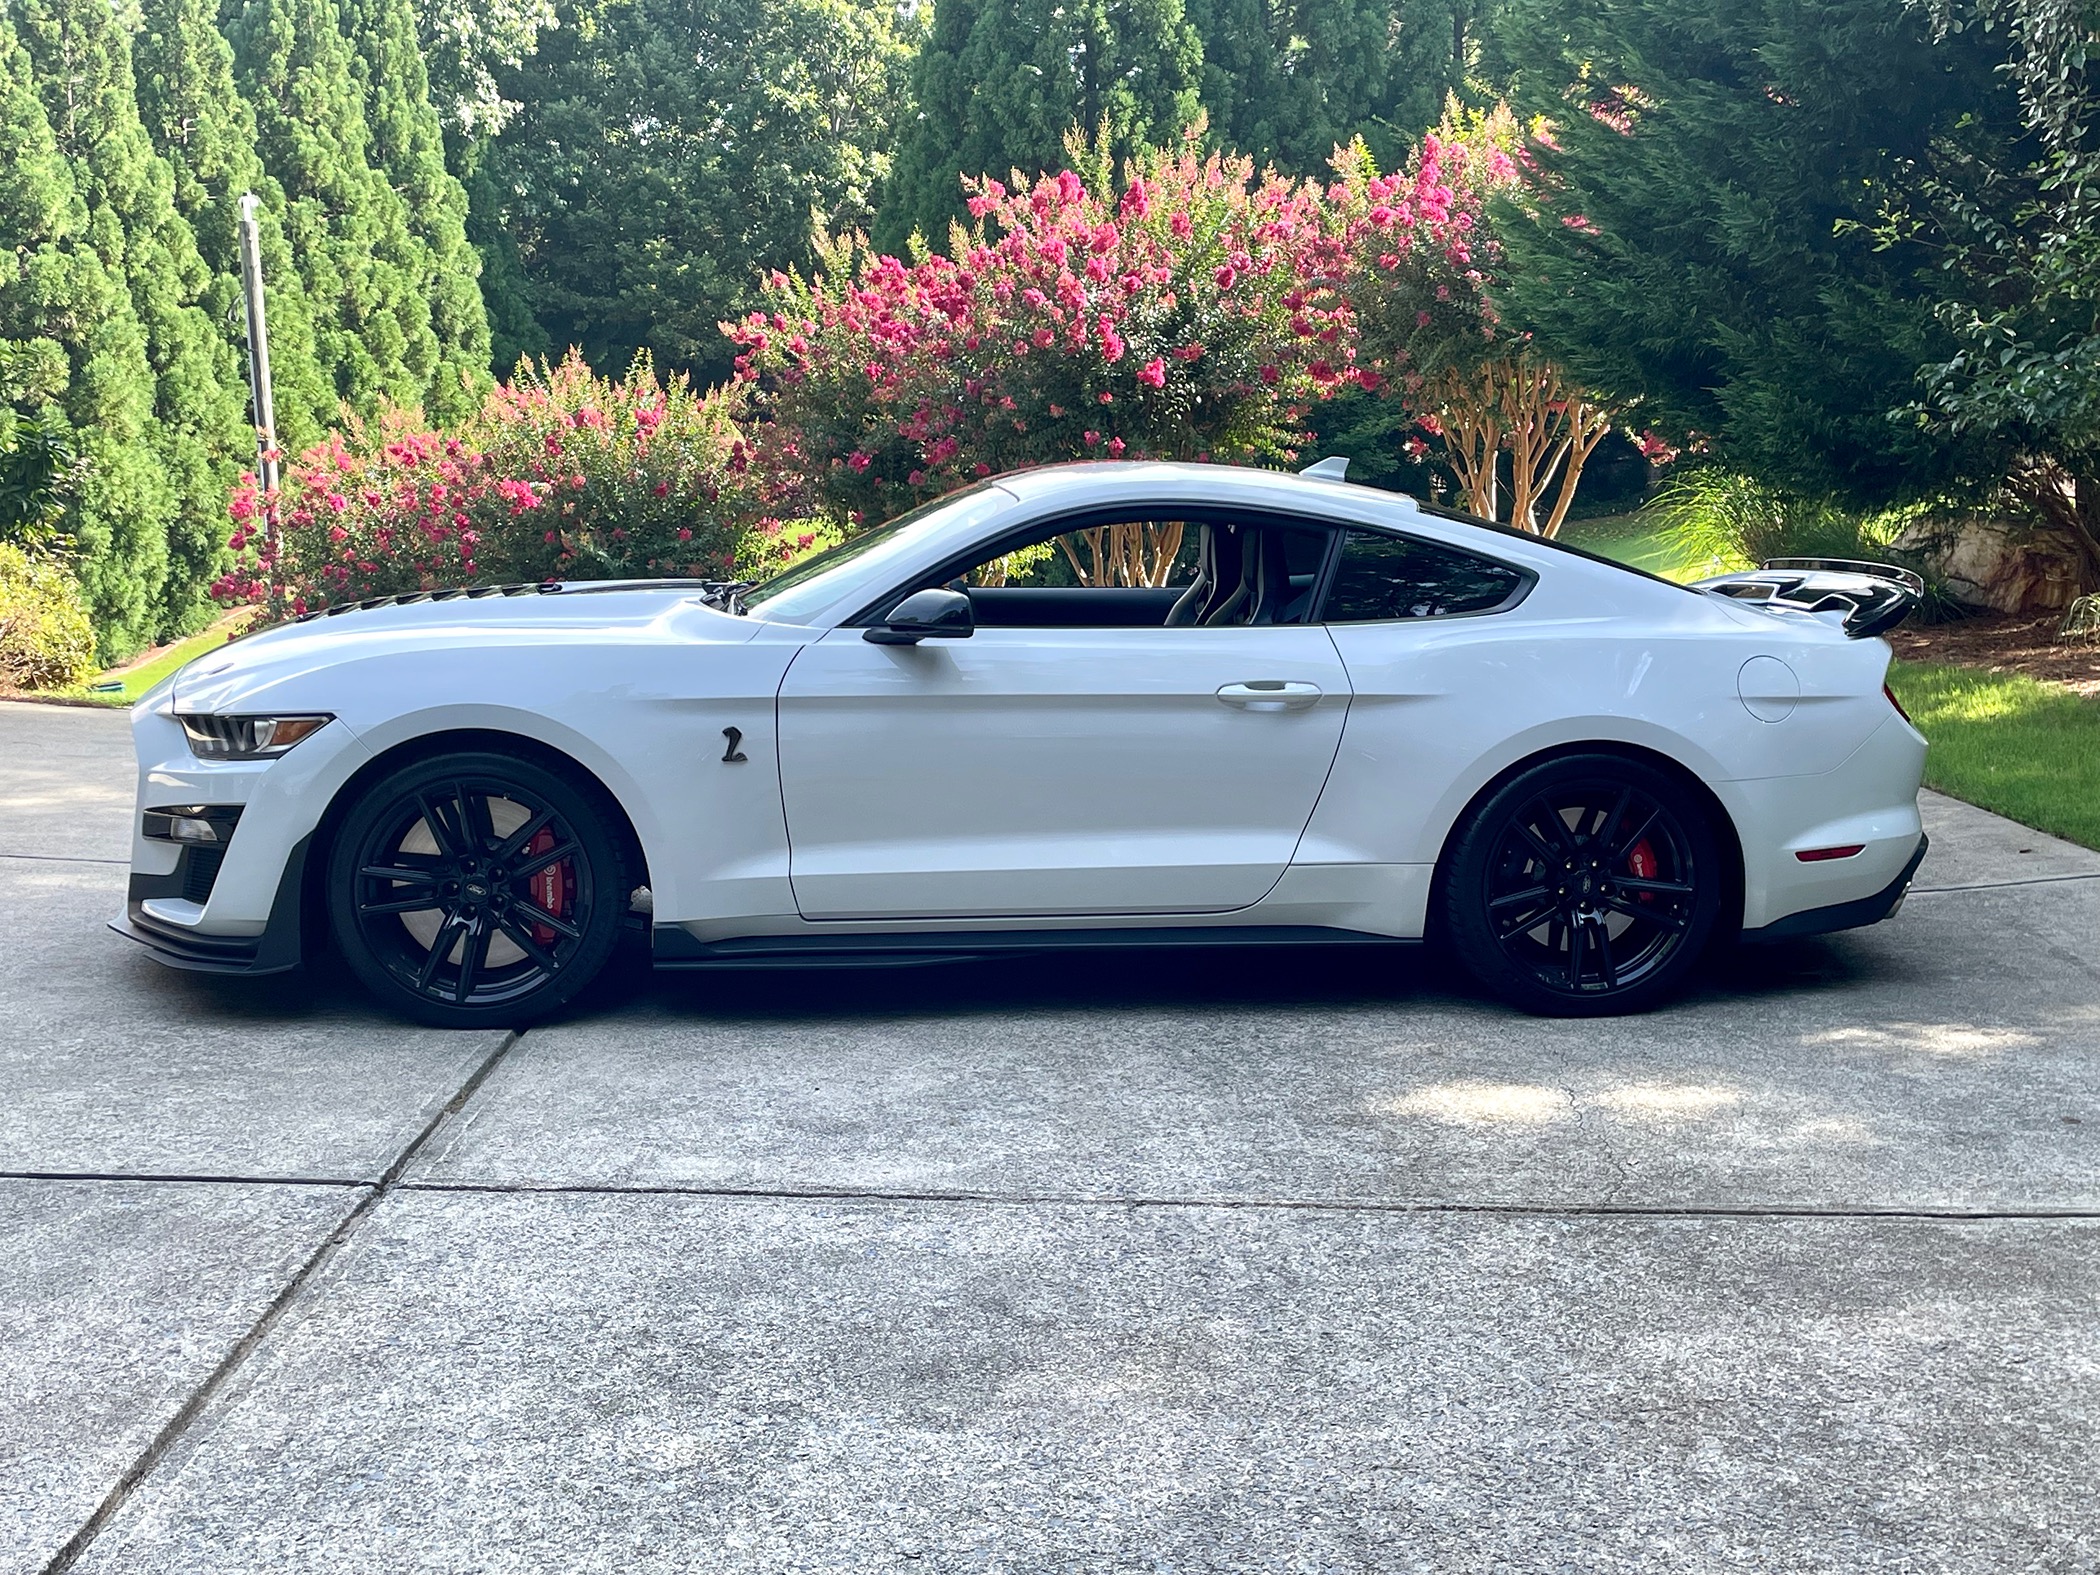 S650 Mustang From This to That S650 (Photos Edition) 763A33C3-2C61-4501-8DD2-18C78CCBE34B